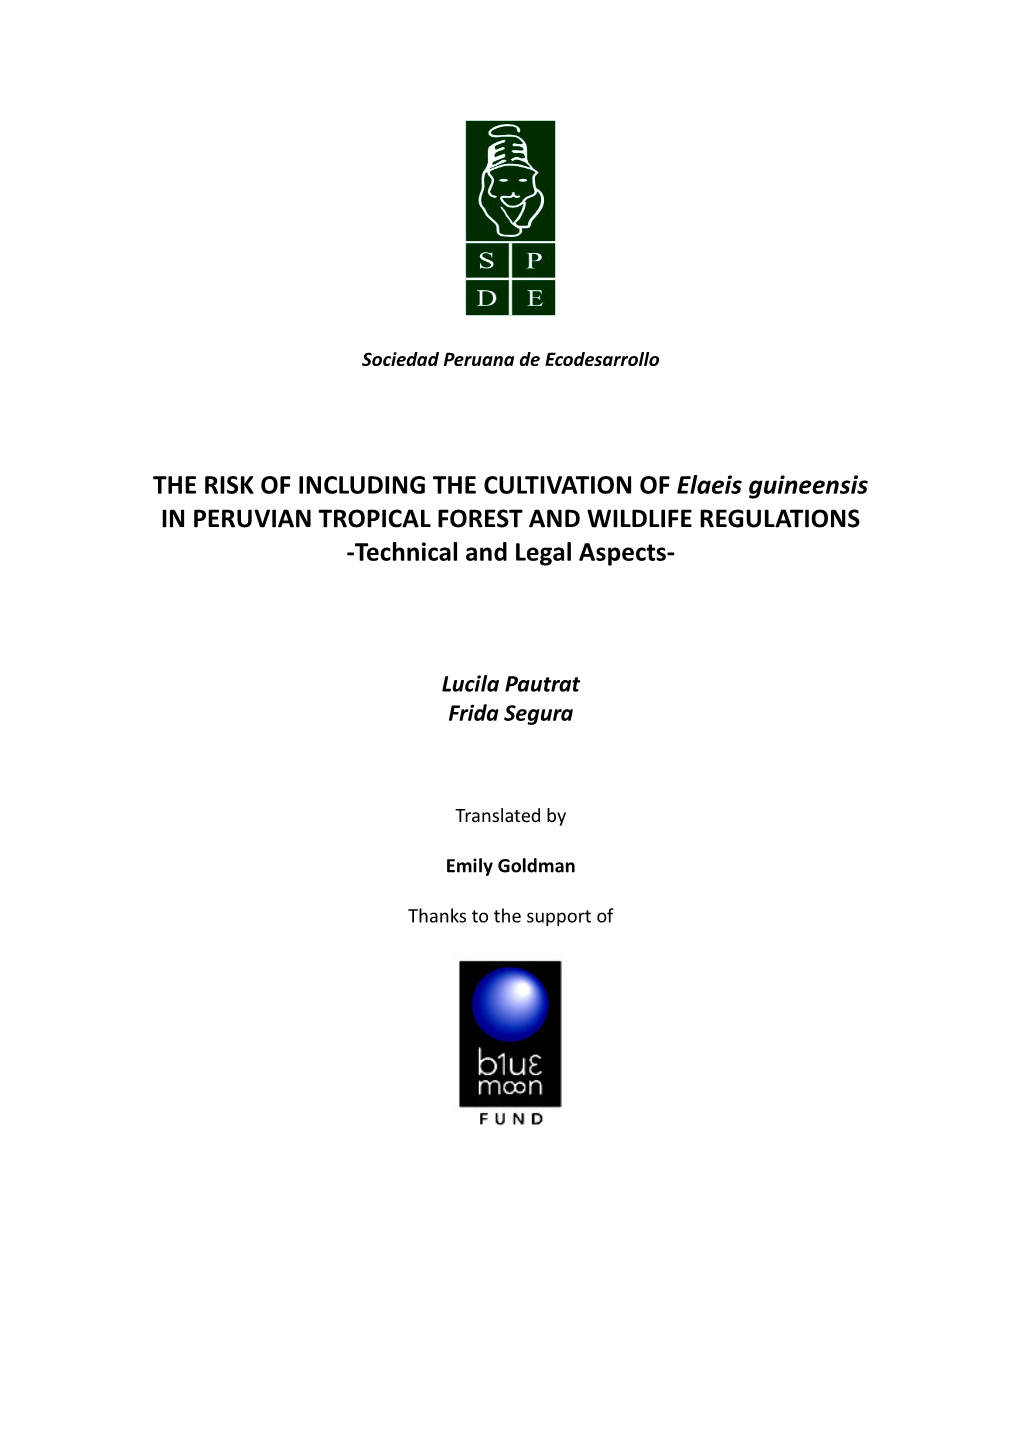 THE RISK of INCLUDING the CULTIVATION of Elaeis Guineensis in PERUVIAN TROPICAL FOREST and WILDLIFE REGULATIONS -Technical and Legal Aspects